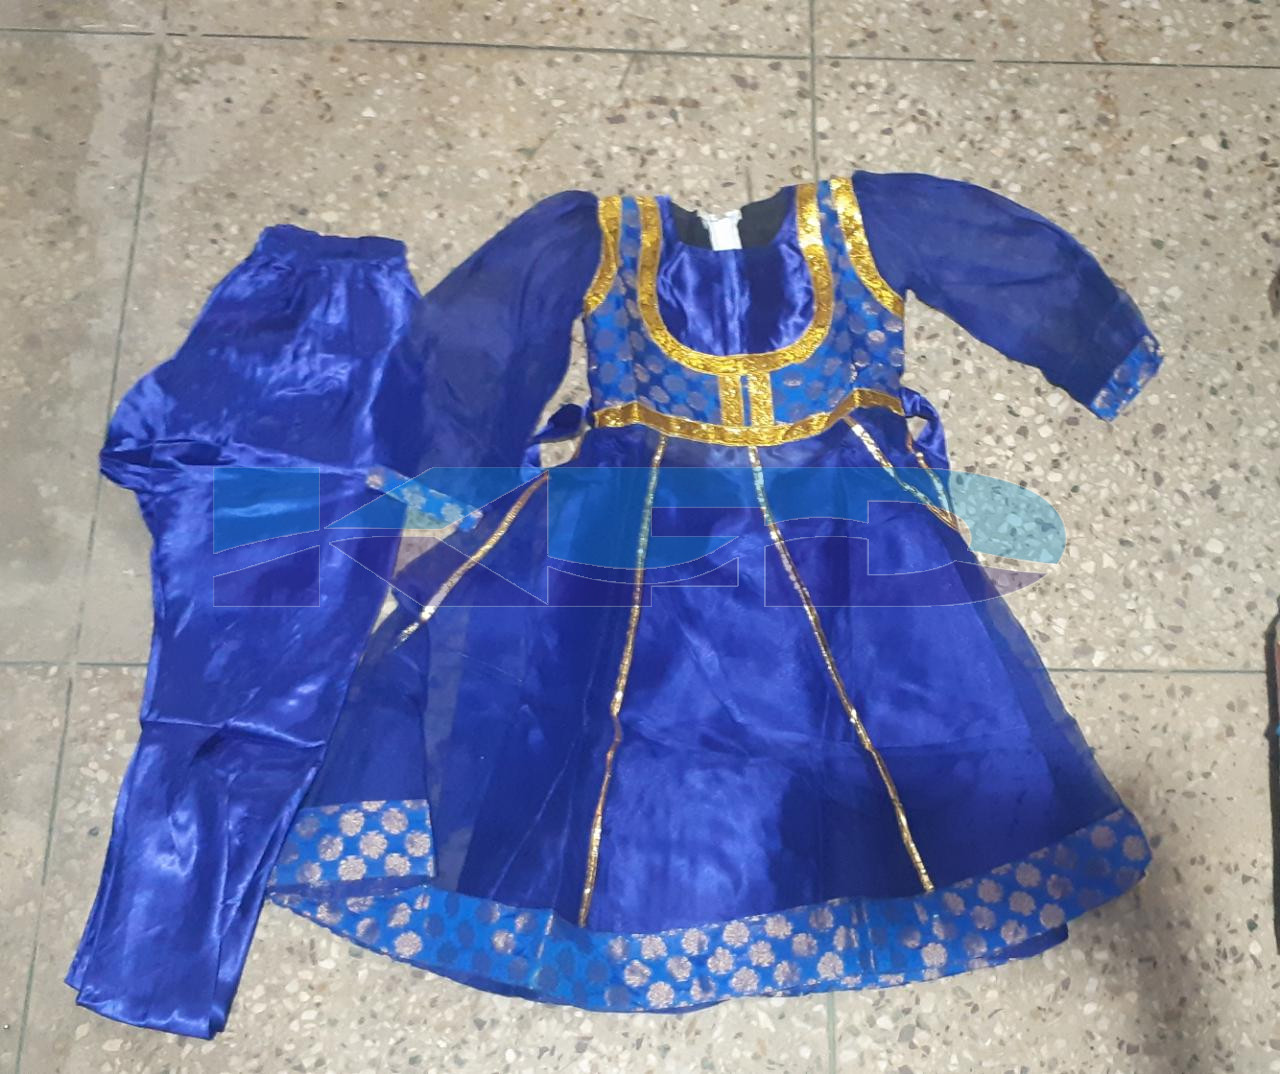 Blue Anarkali Fancy Dress For Kids,Costume For Annual Function/Theme Party/Competition/Stage Shows Dress